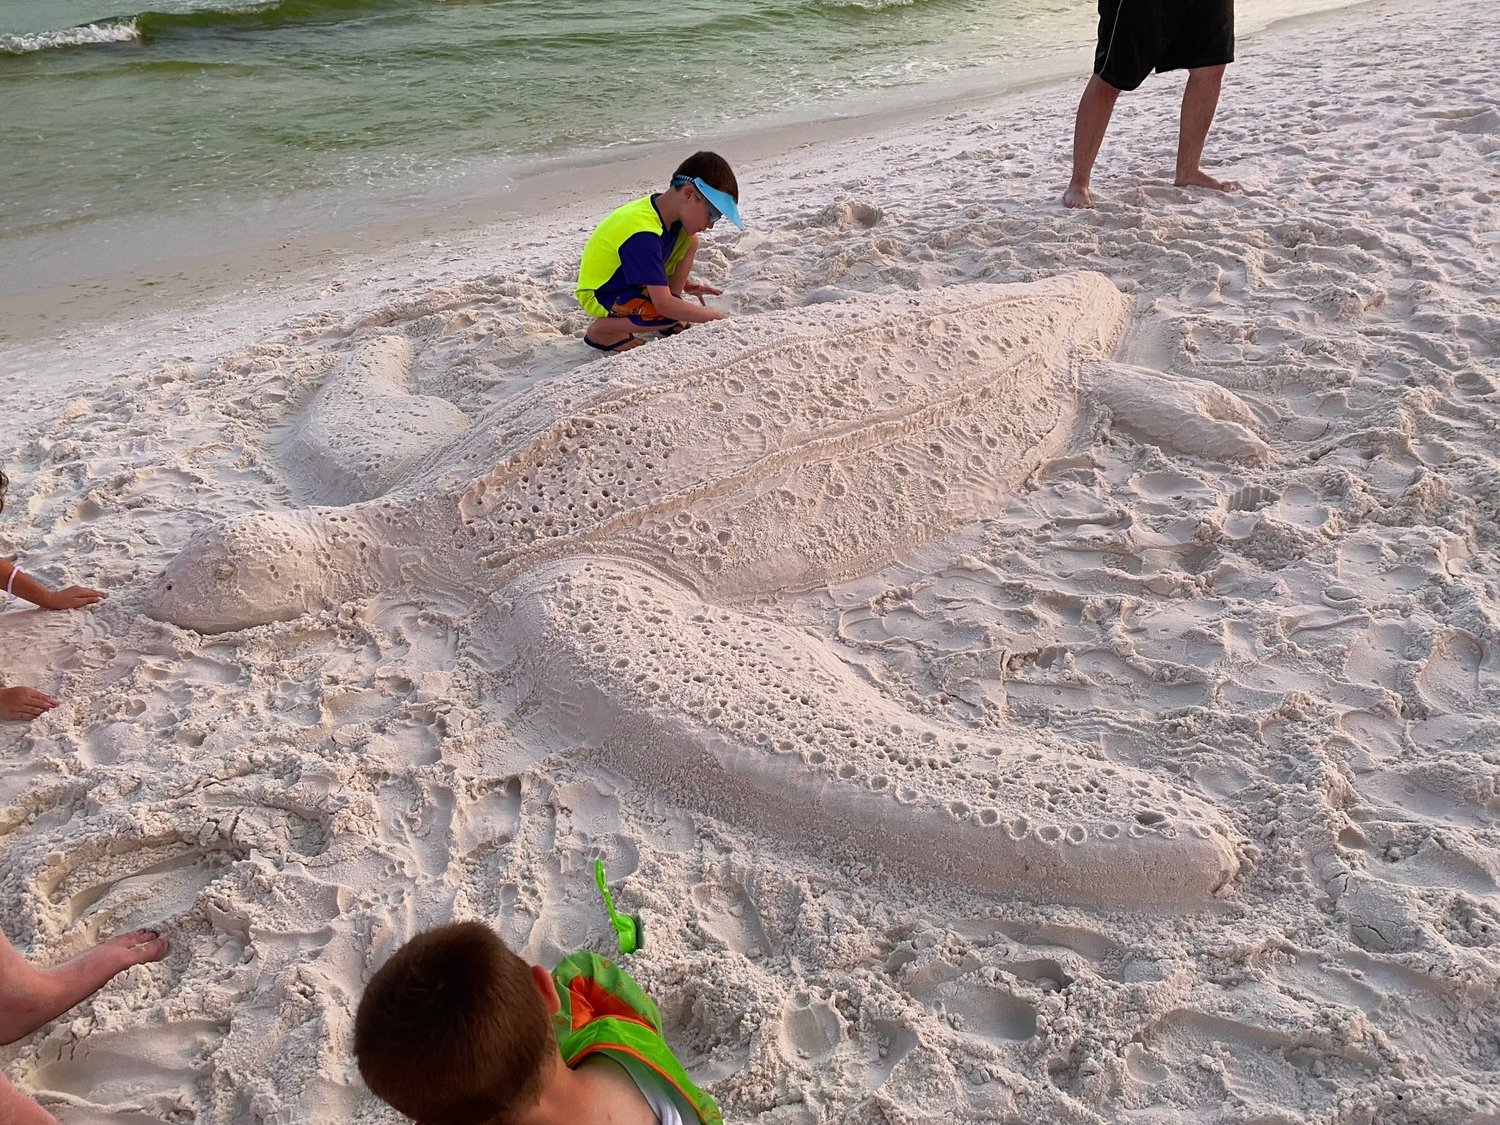 Sarah Jones and her family headed to Florida to spend time with extended family and soak up the sun. Together they made a giant sea turtle sculpture on the beach. Photo credit: Sarah Saxon Jones-Fordland.